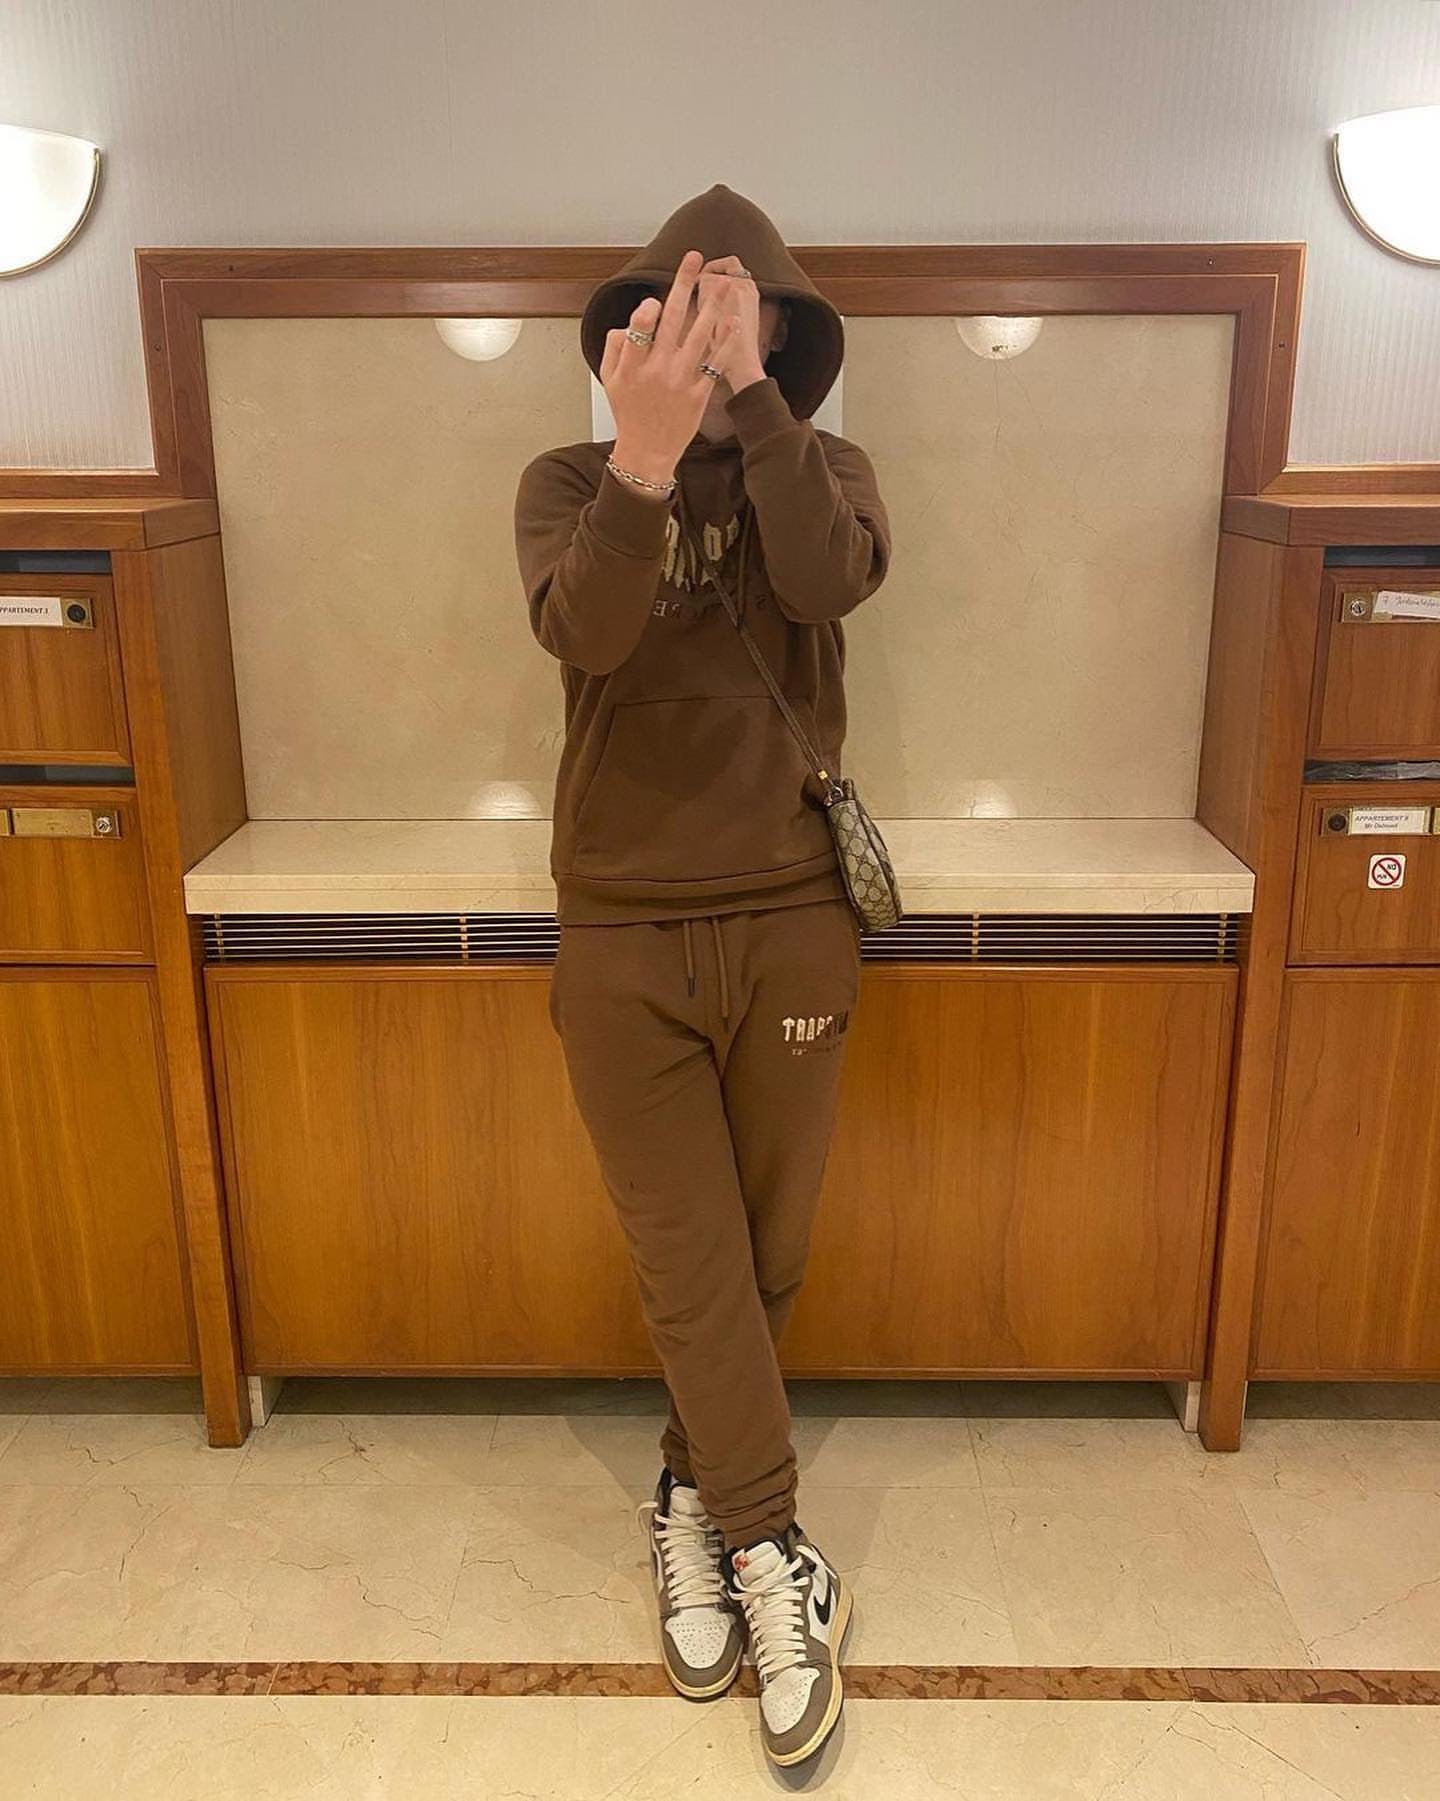 Trapstar Chenille Decoded Hooded Tracksuit-Brown